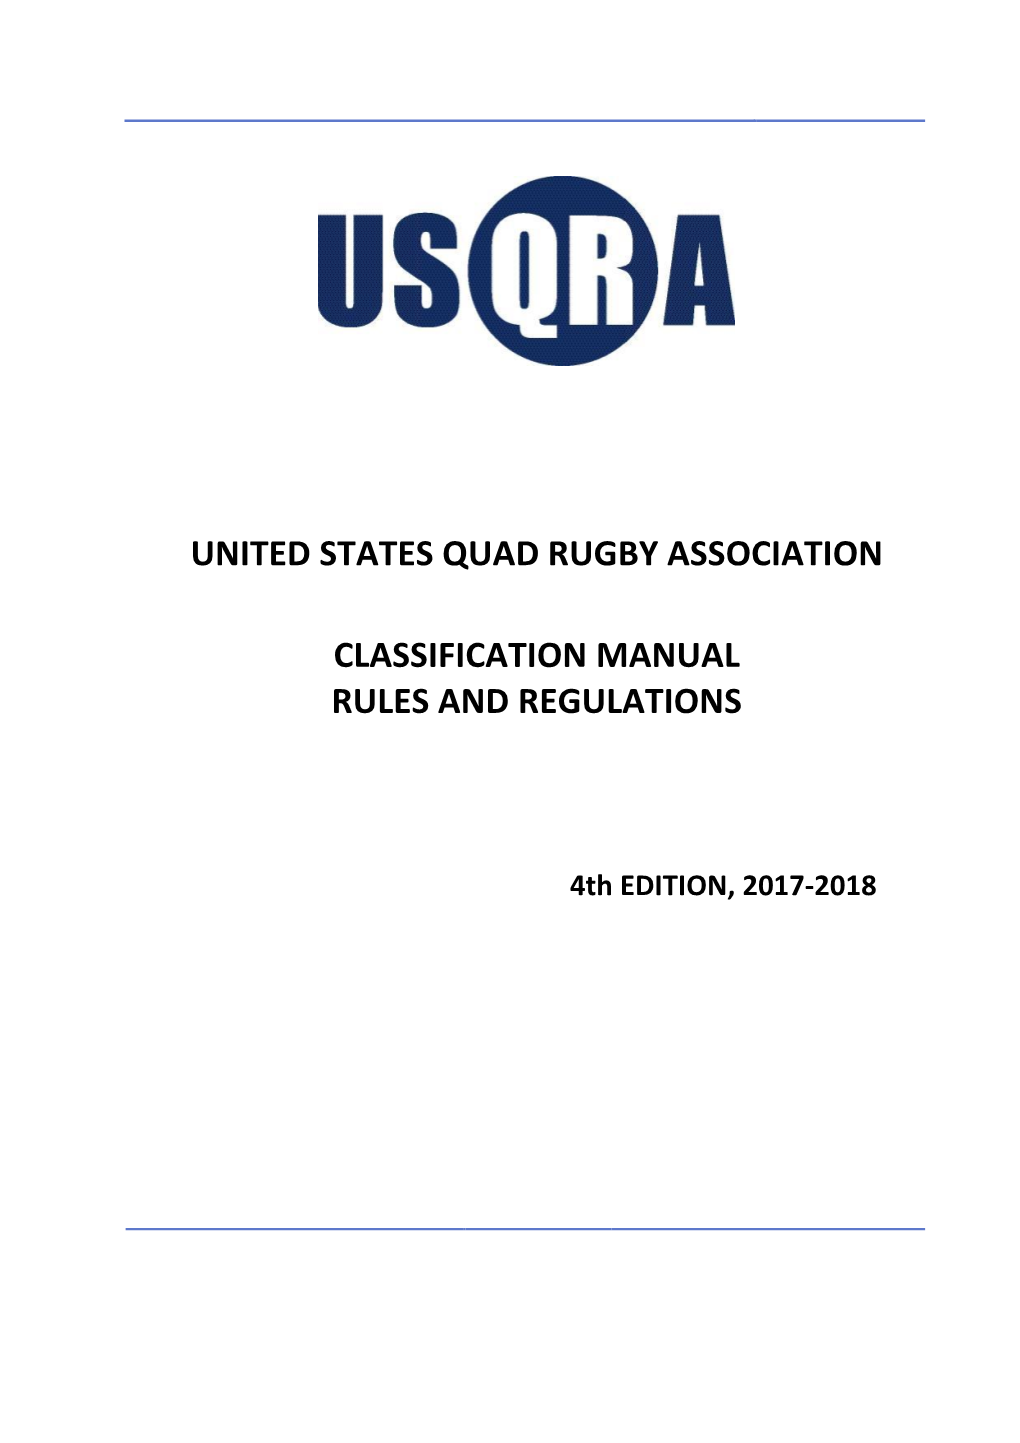 United States Quad Rugby Association Classification Manual Rules And